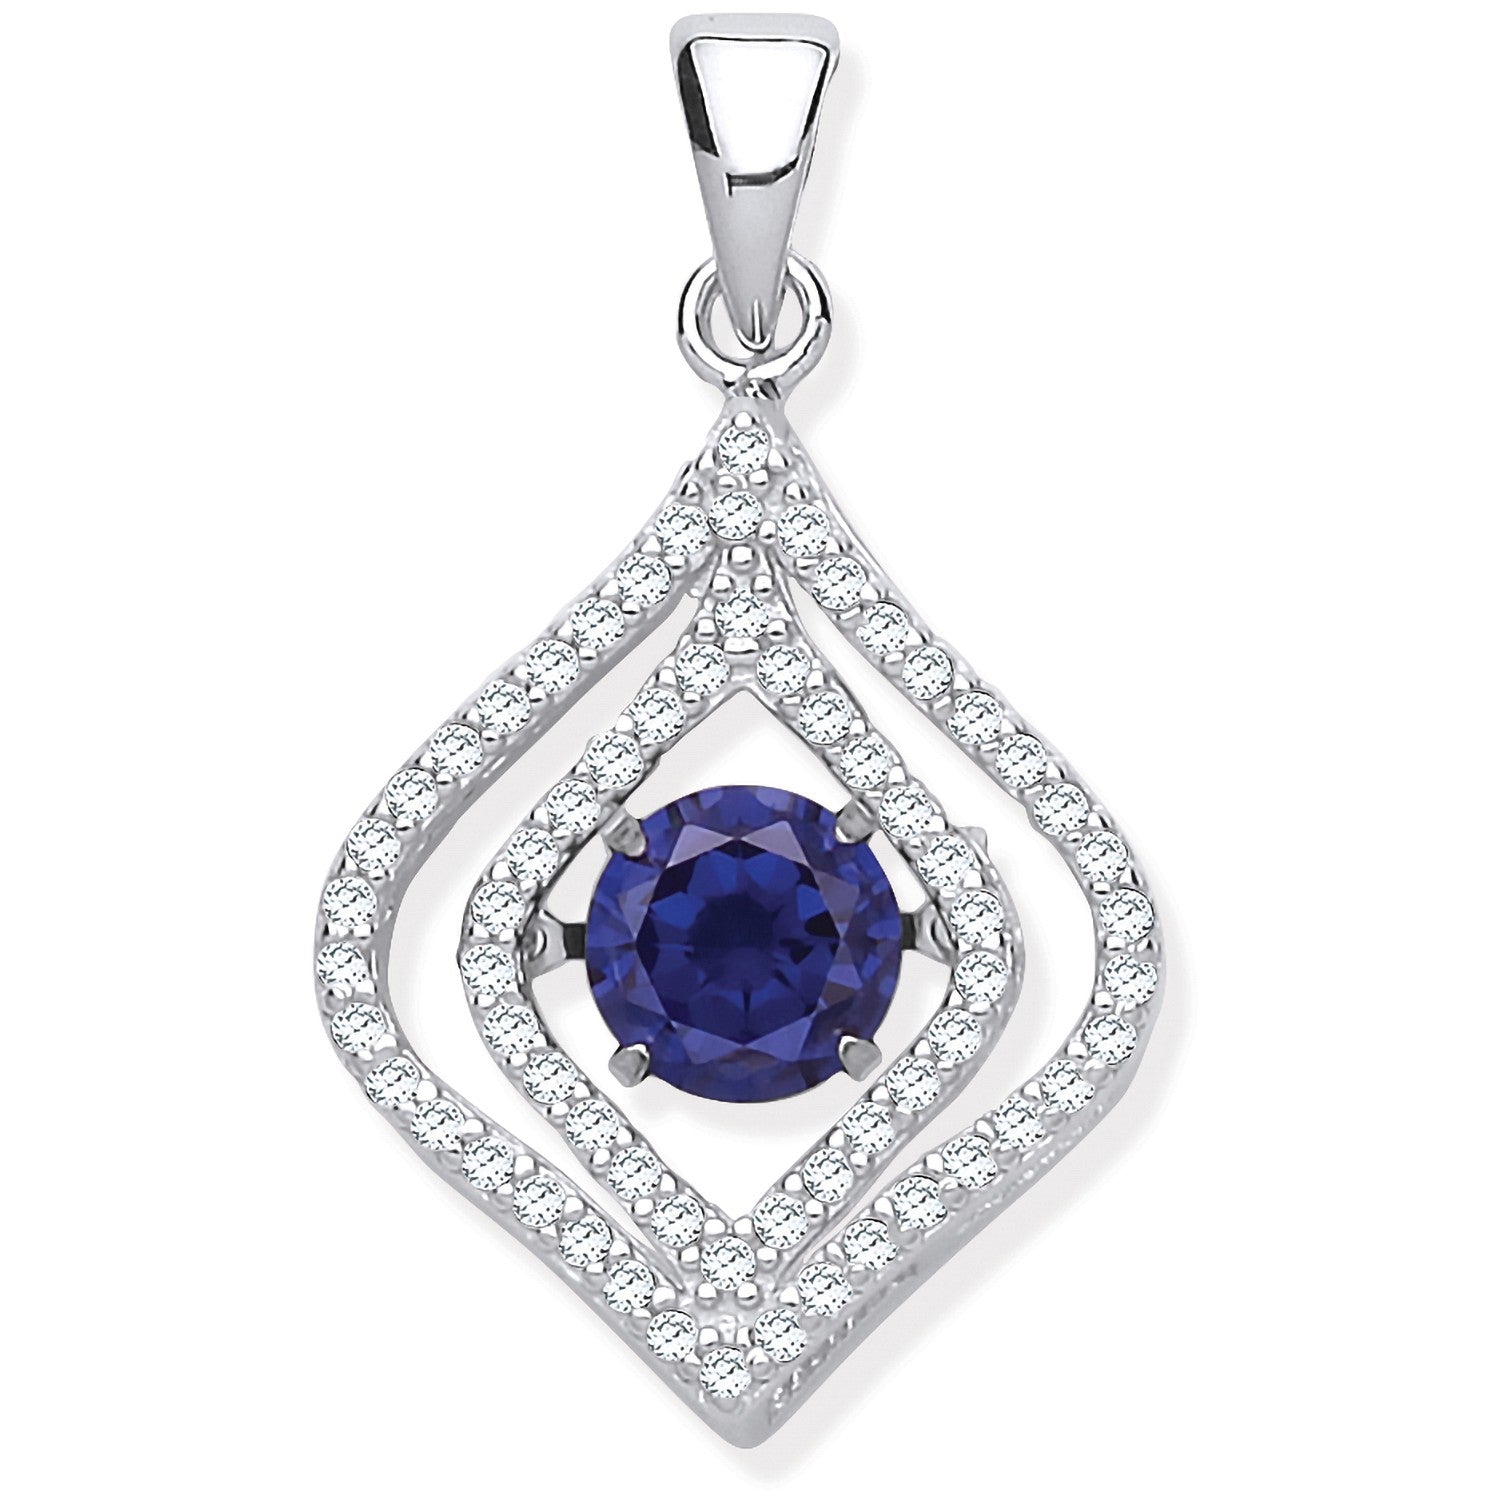 925 Sterling Silver Cz Pendant with Hanging Shimmering Blue Cz - FJewellery